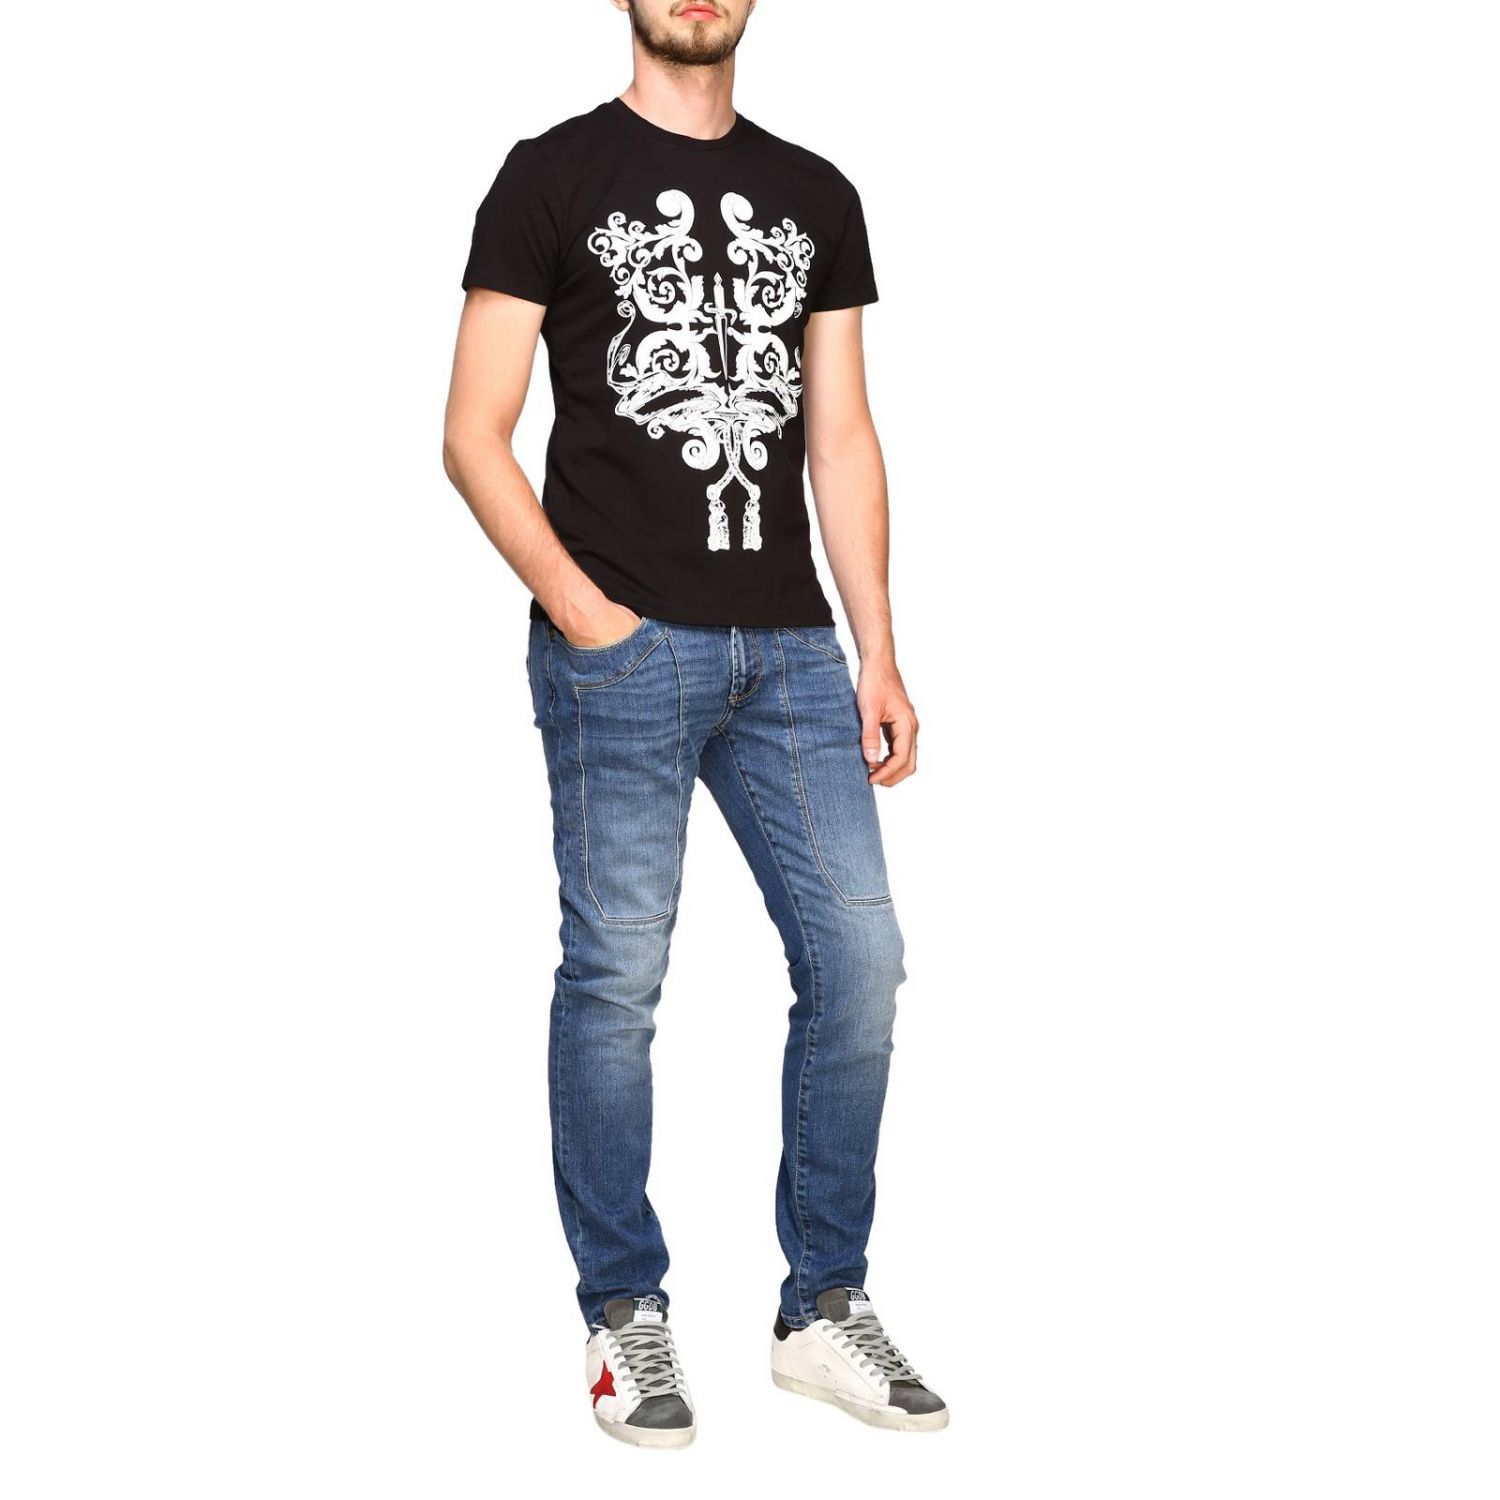 Paciotti 4Us Outlet: T-shirt with print and logo - Black | Paciotti 4Us ...